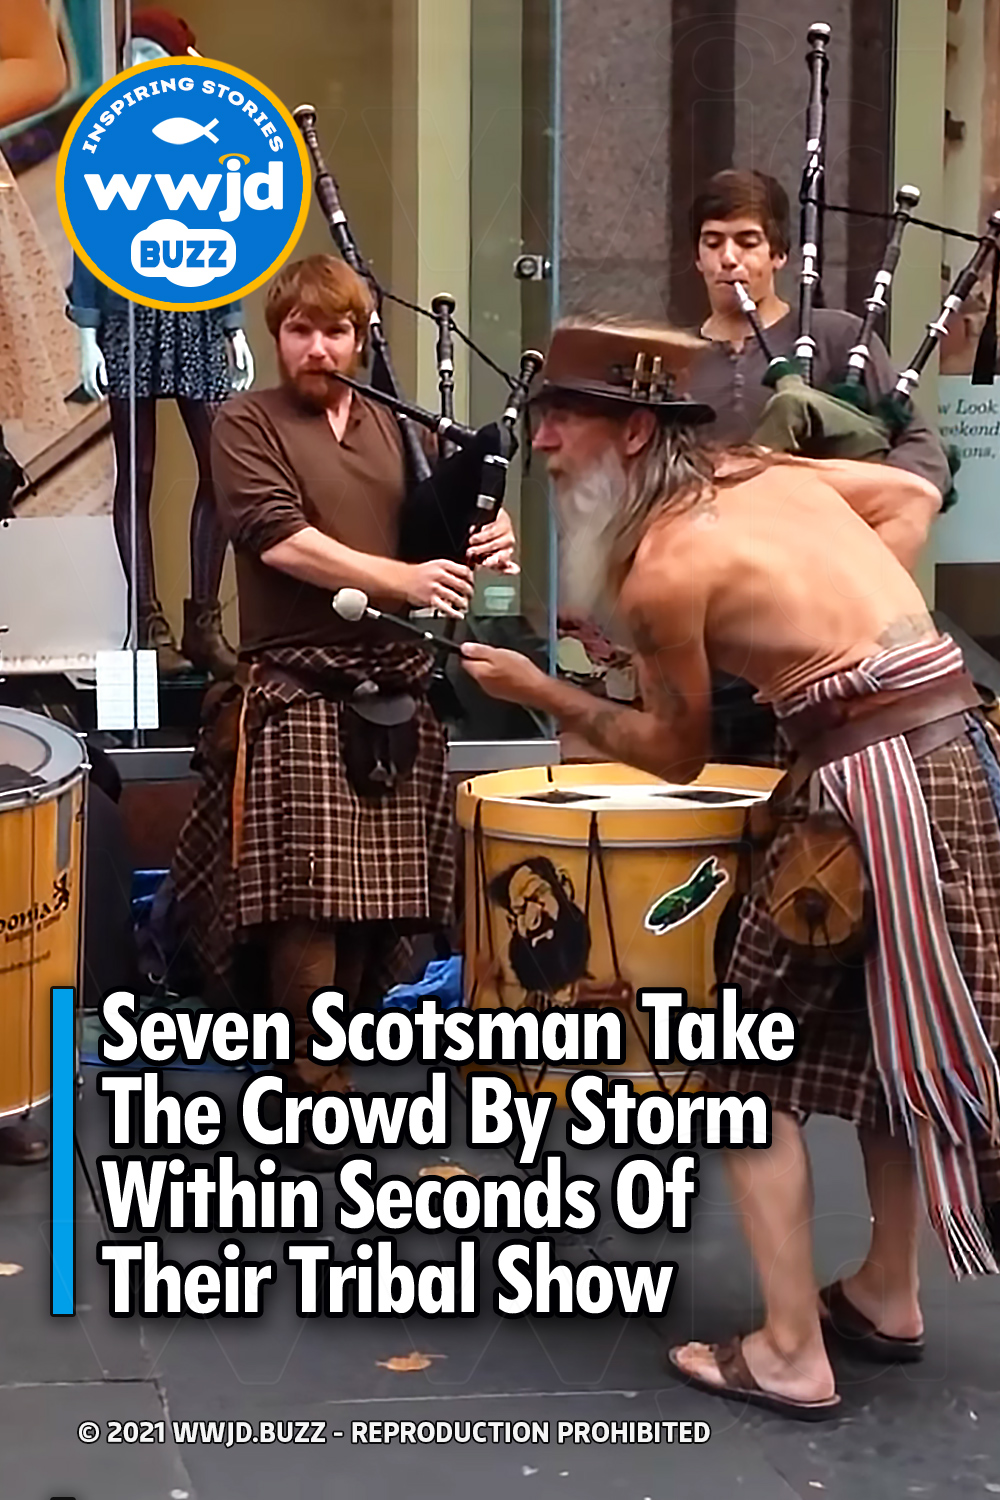 Seven Scotsman Take The Crowd By Storm Within Seconds Of Their Tribal Show